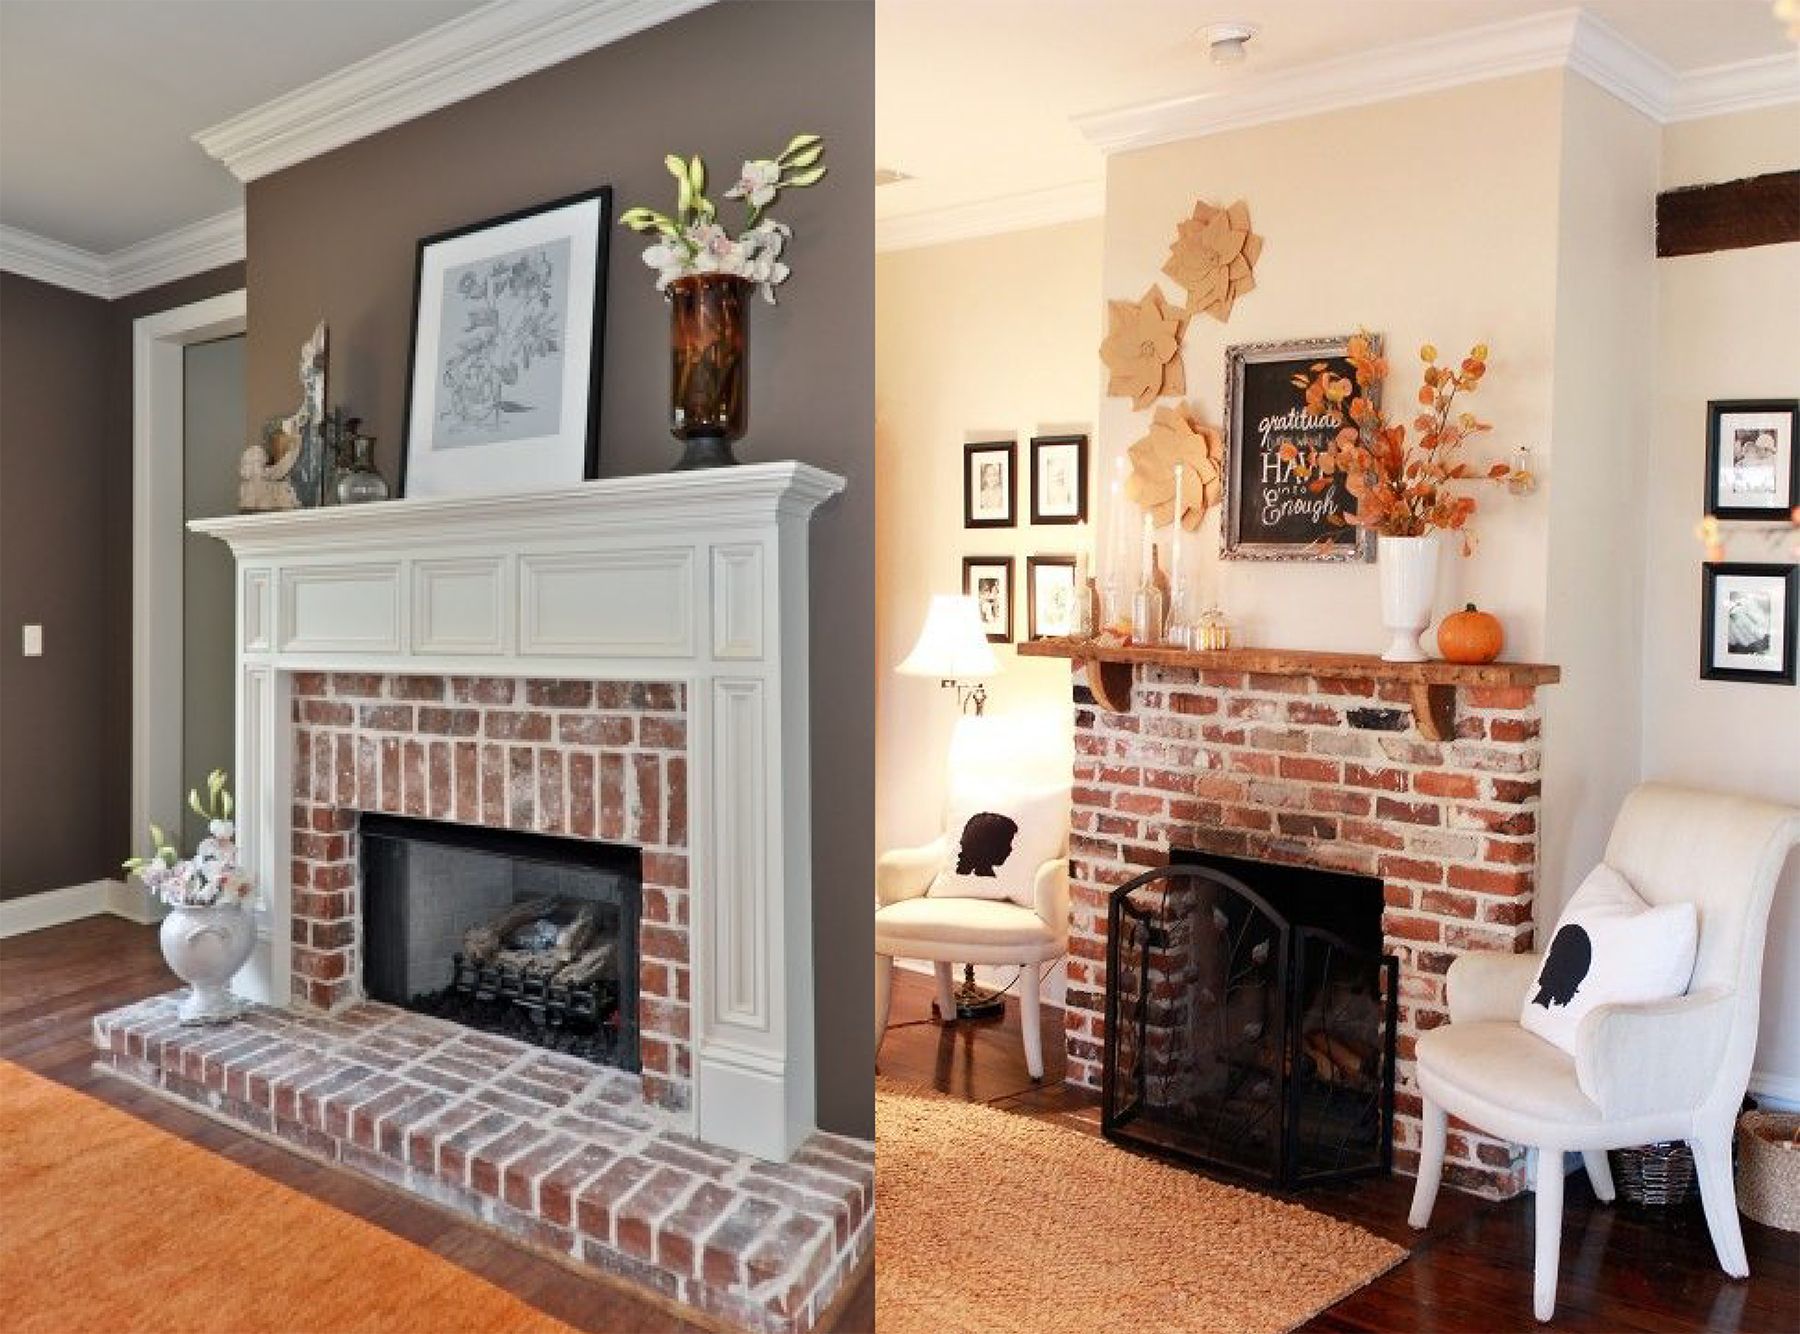 How to Paint A Brick Fireplace to Look Like Stone Fresh Exposed Brick Fireplace Almond Home In 2019